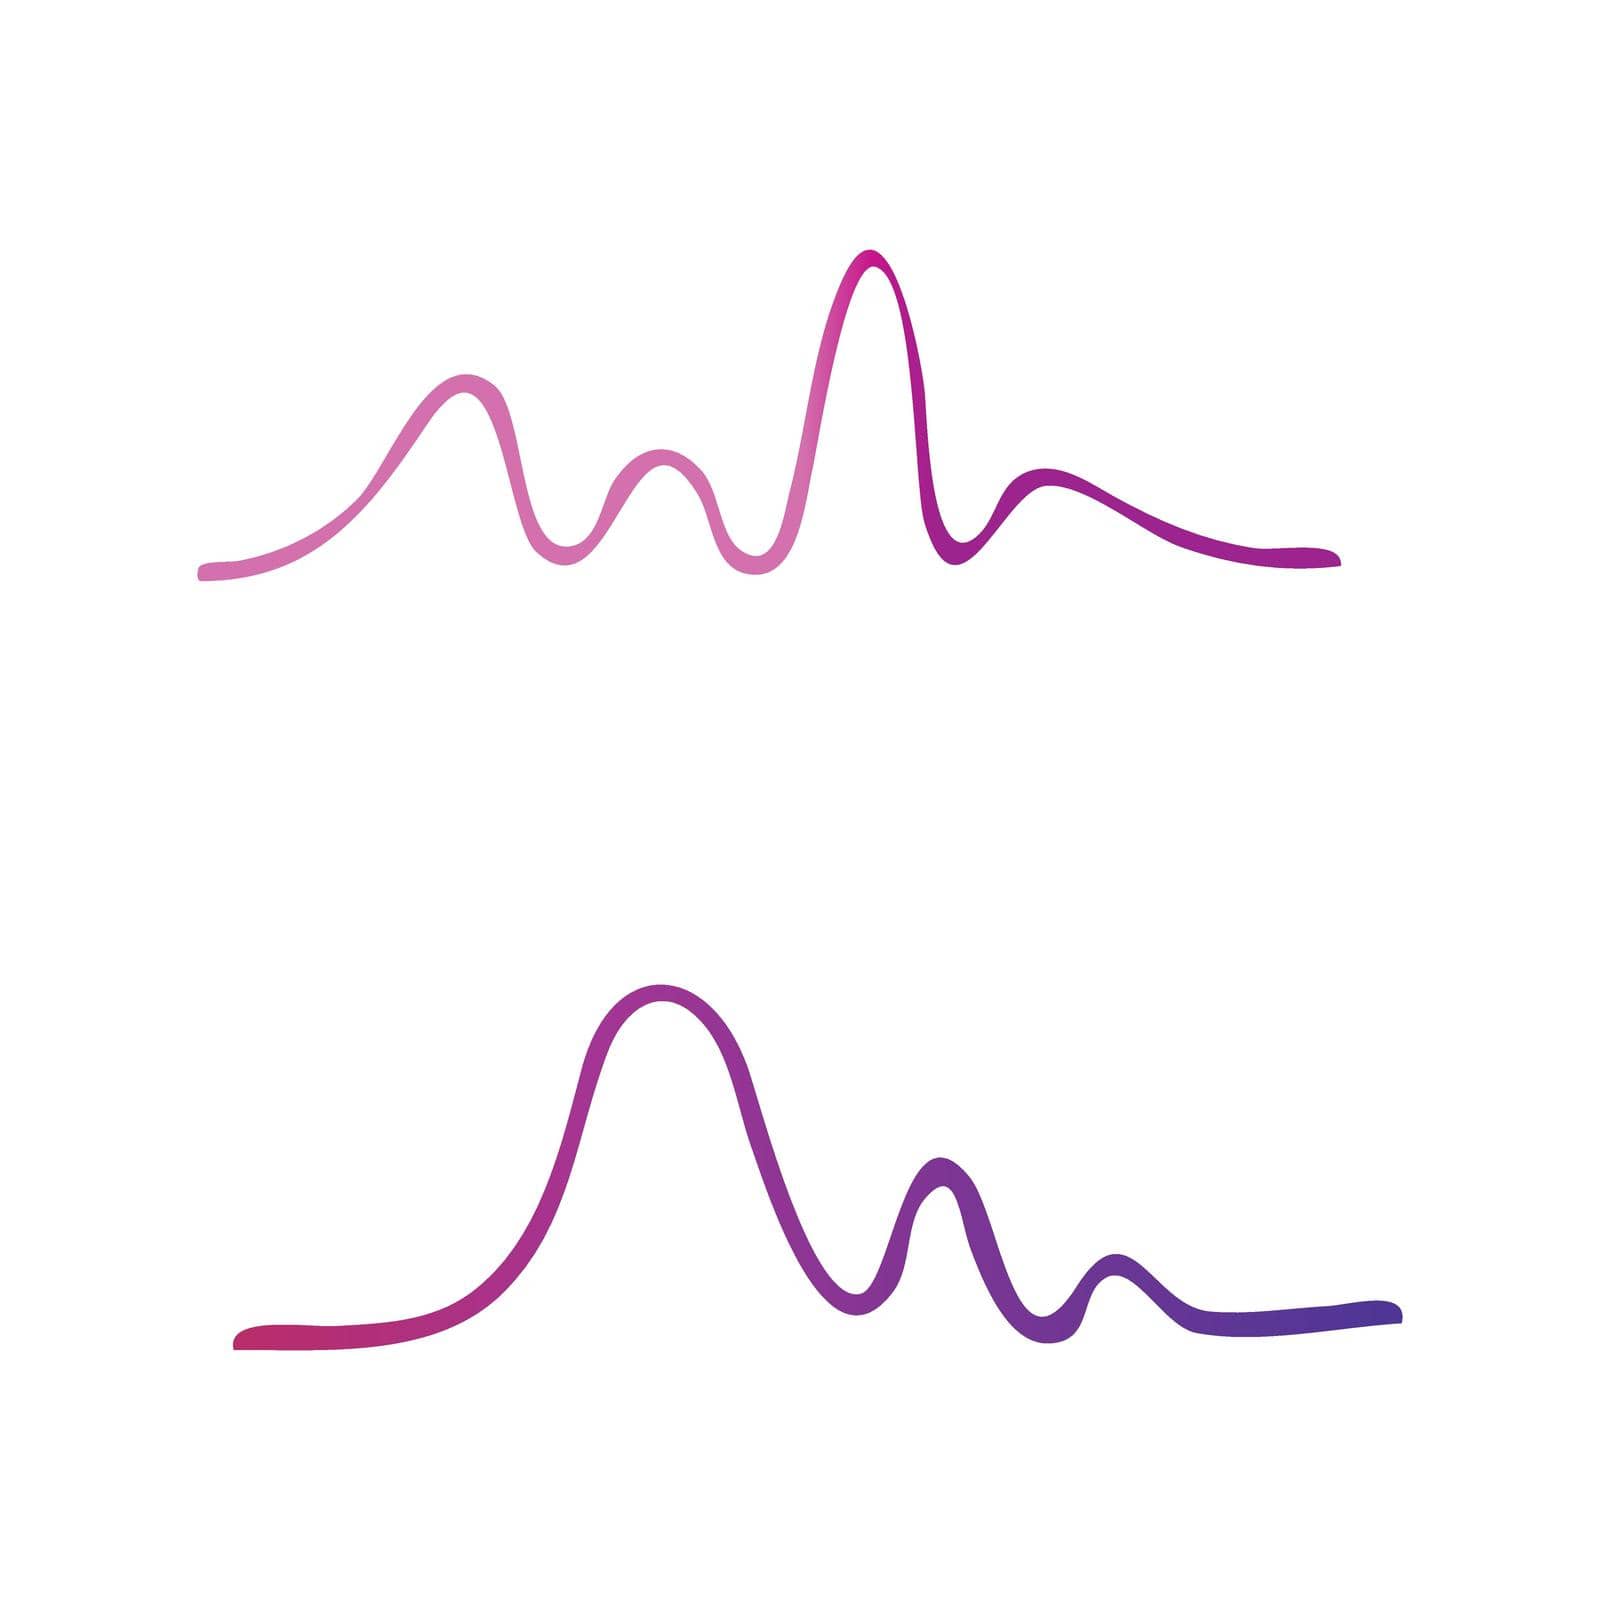 Sound waves vector illustration by Redgraphic